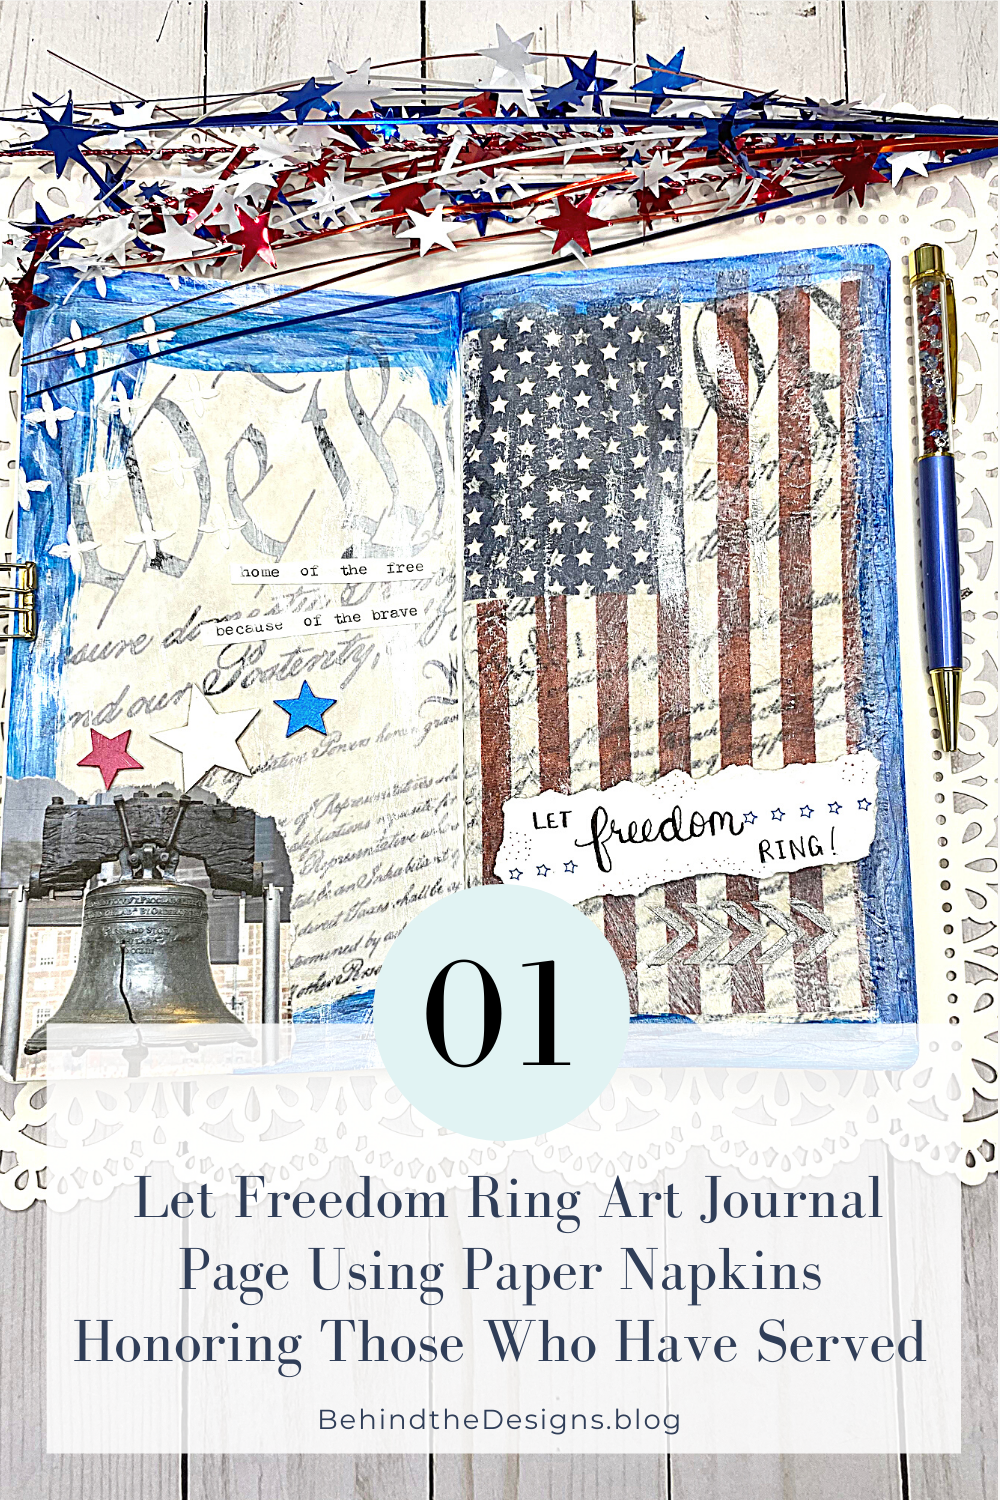 Let Freedom Ring Art Journal Page Using Paper Napkins